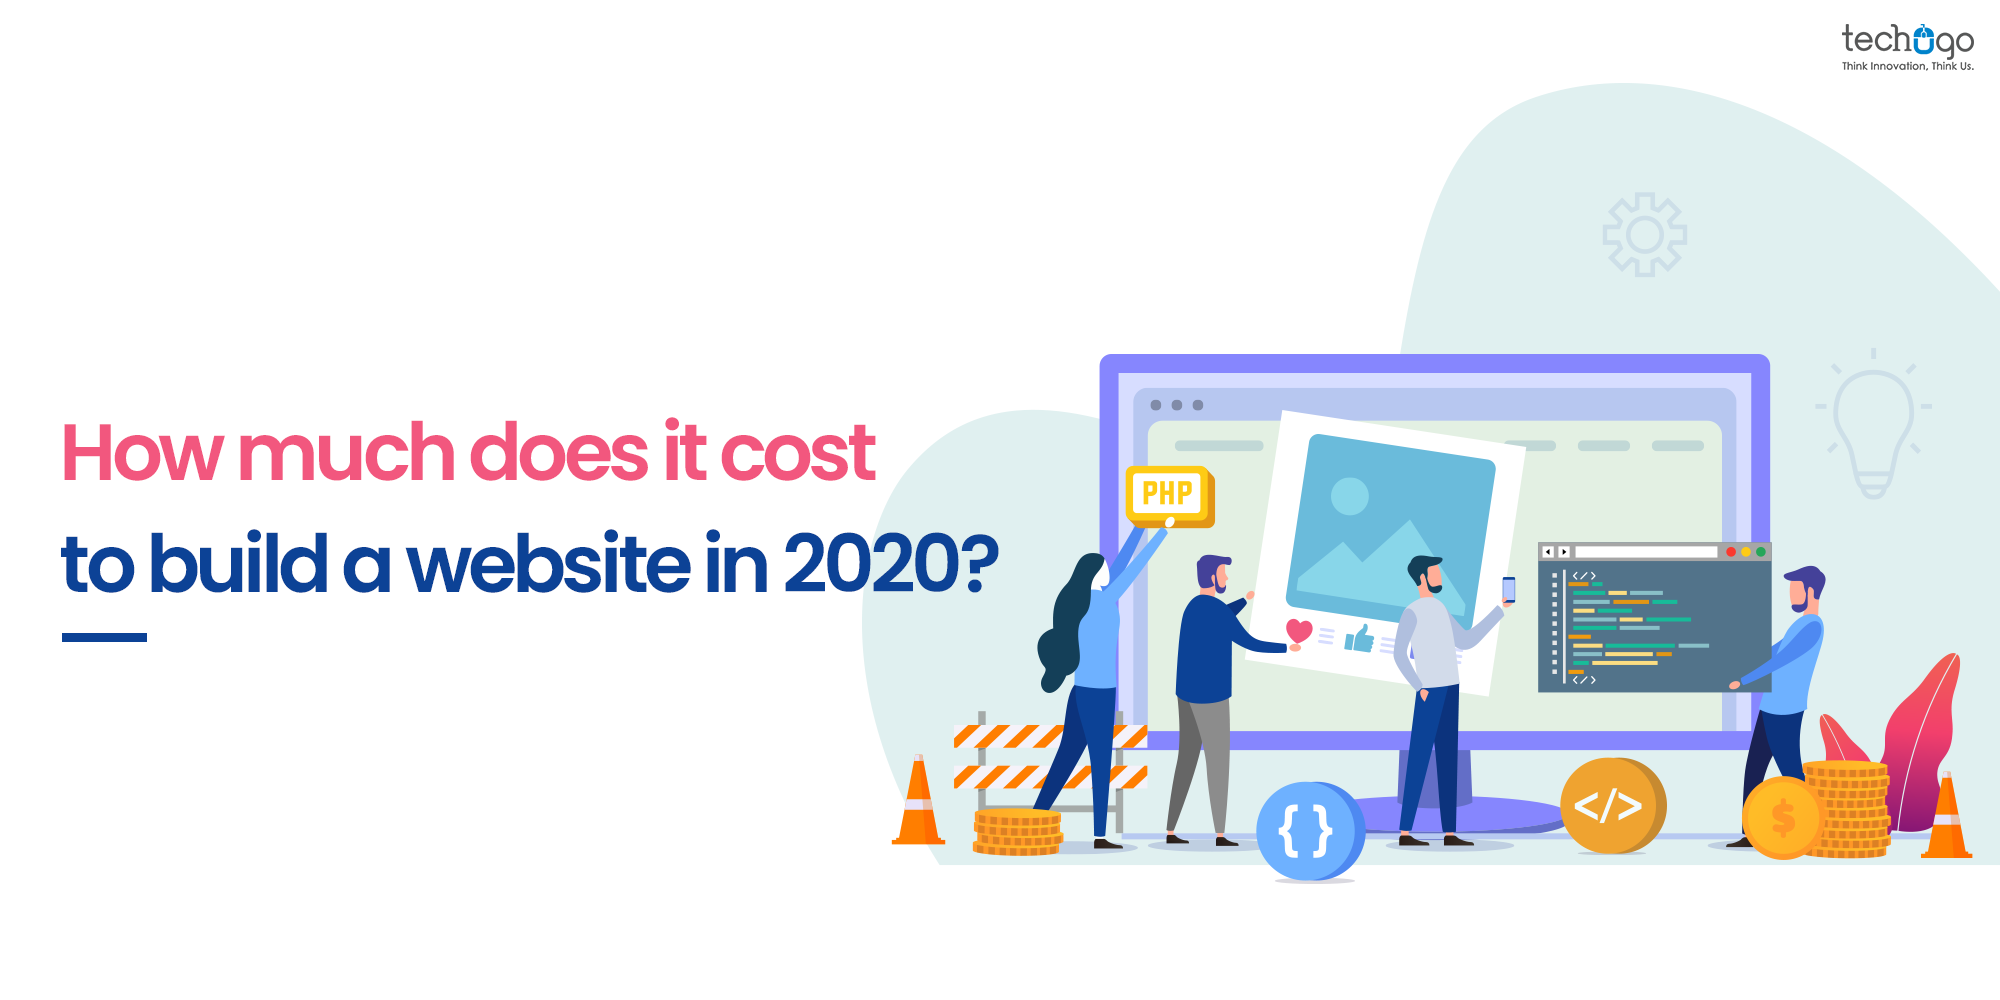 How Much Does It Cost To Build A Website In 2020?